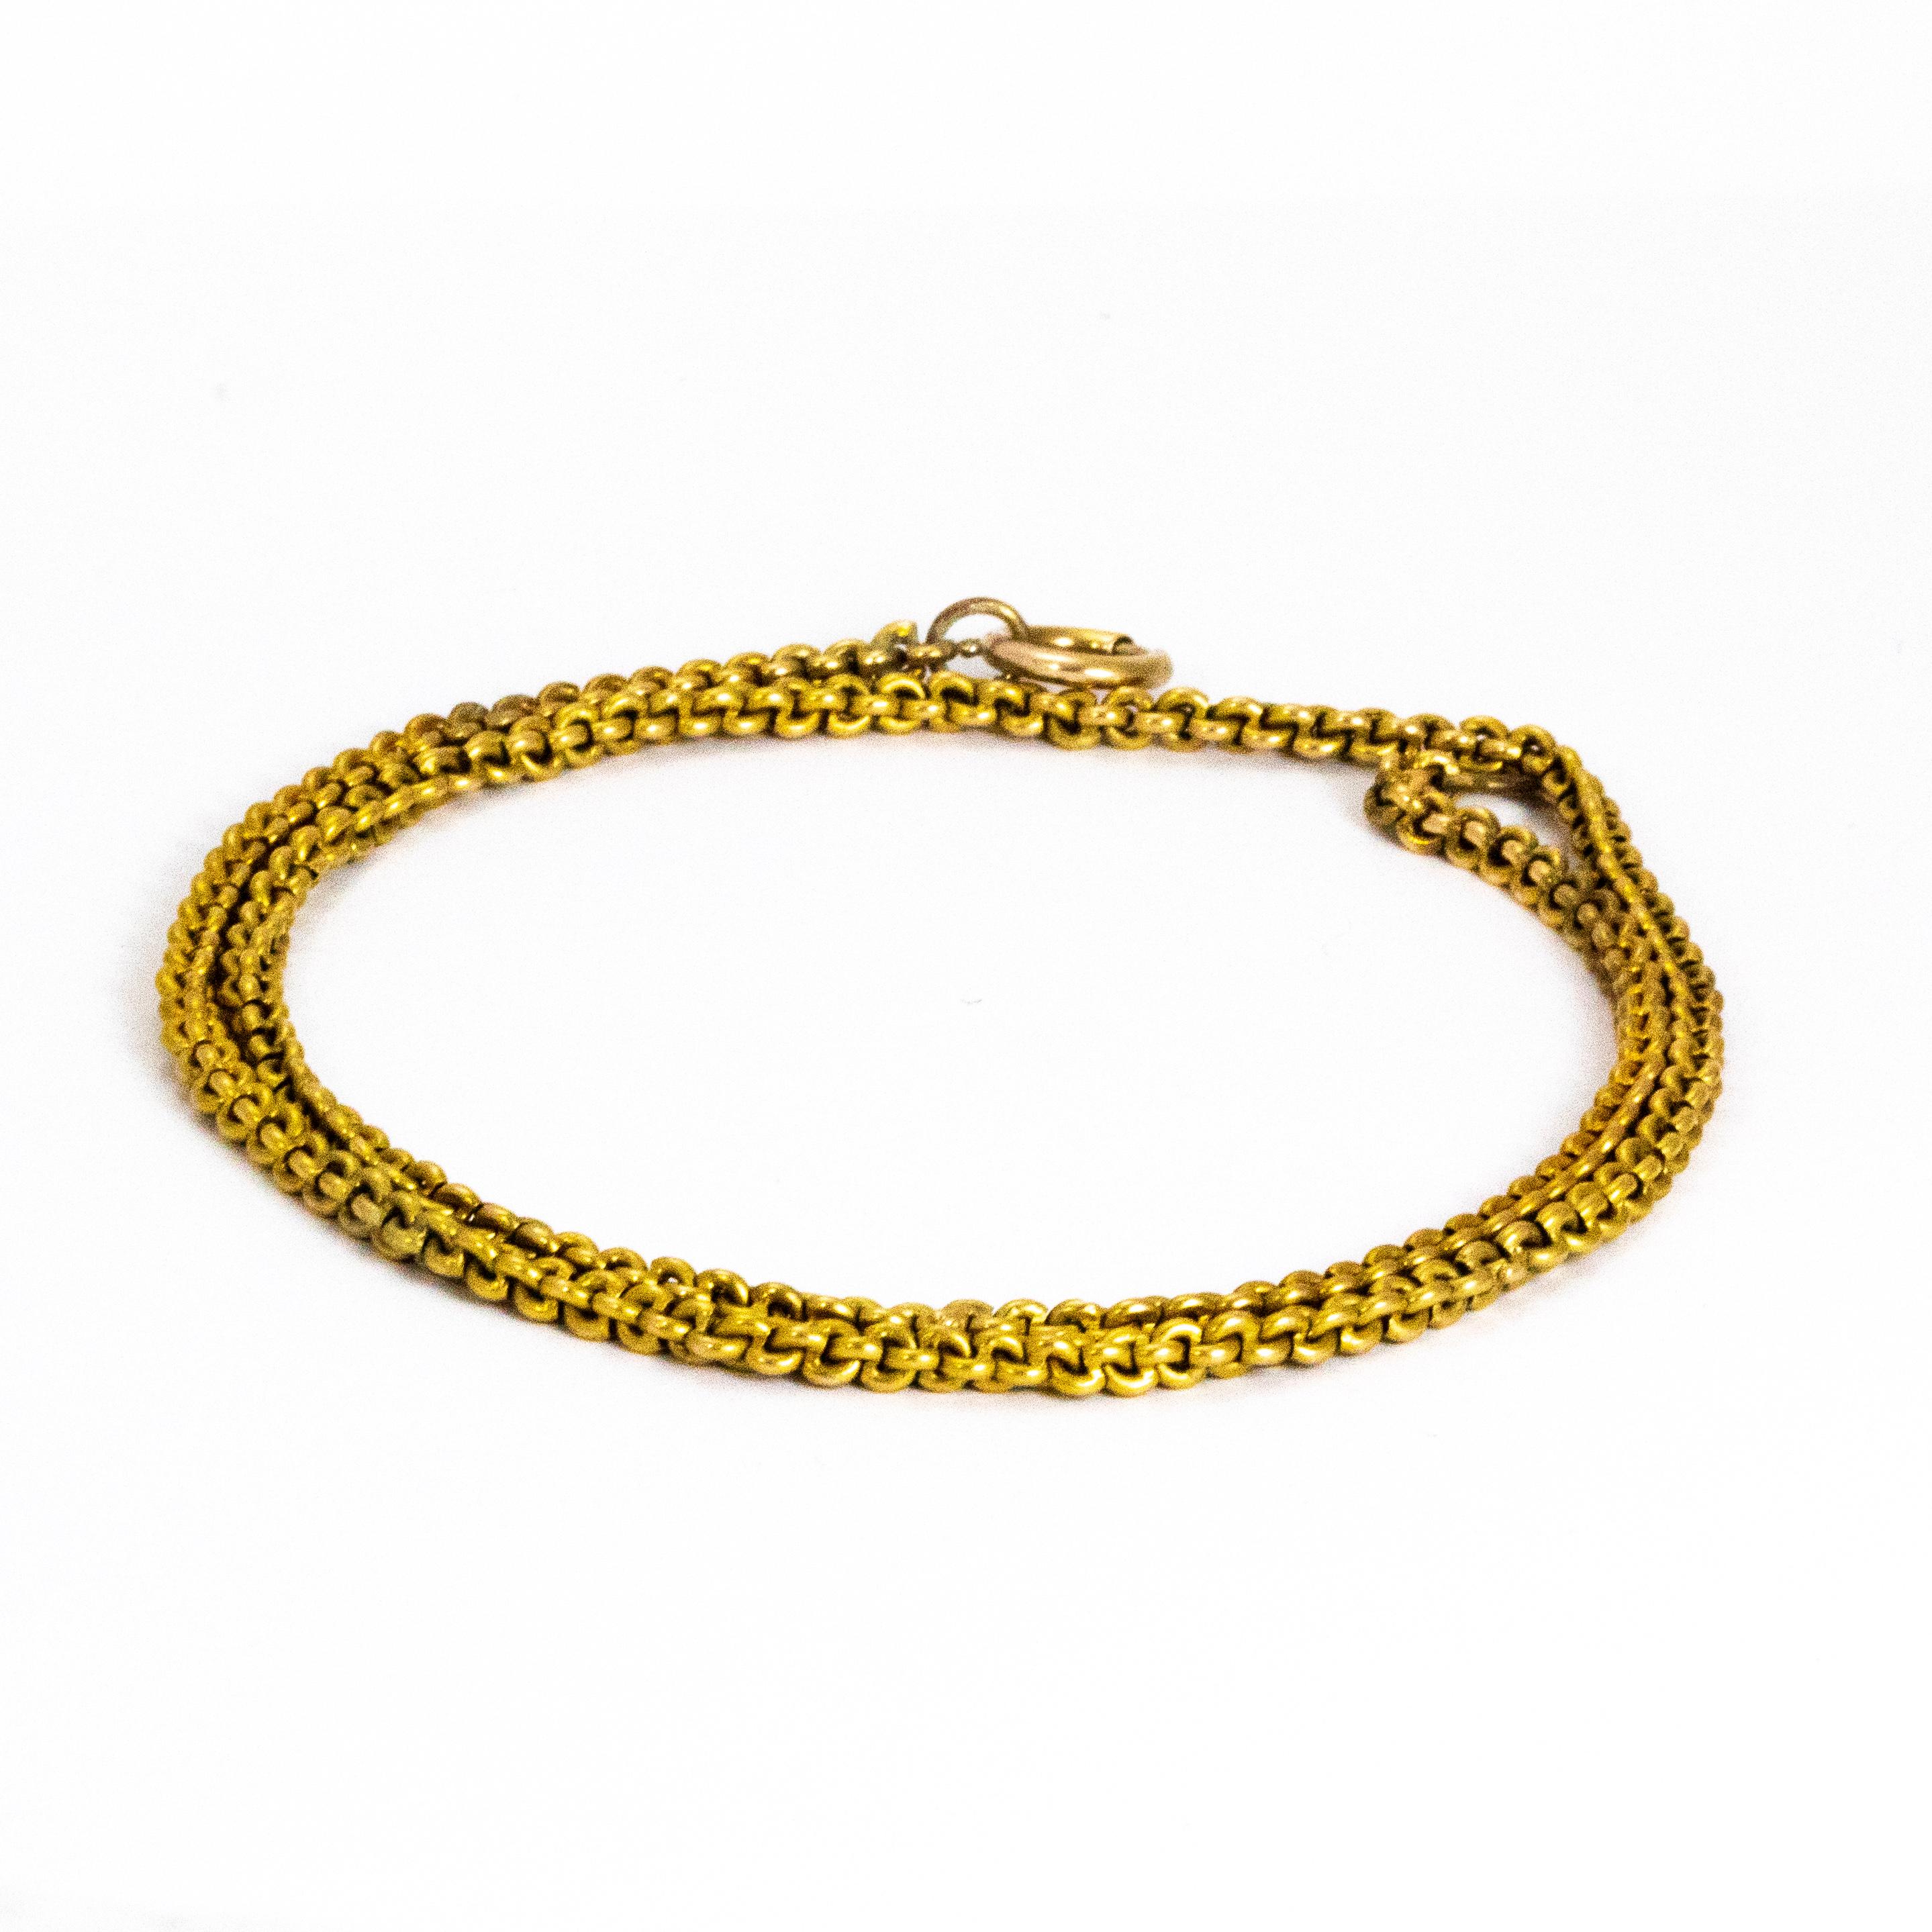 Stylish tight fit link chain modelled out of 18ct gold. The chain has a very smooth feel to it.

Length: 18inches 